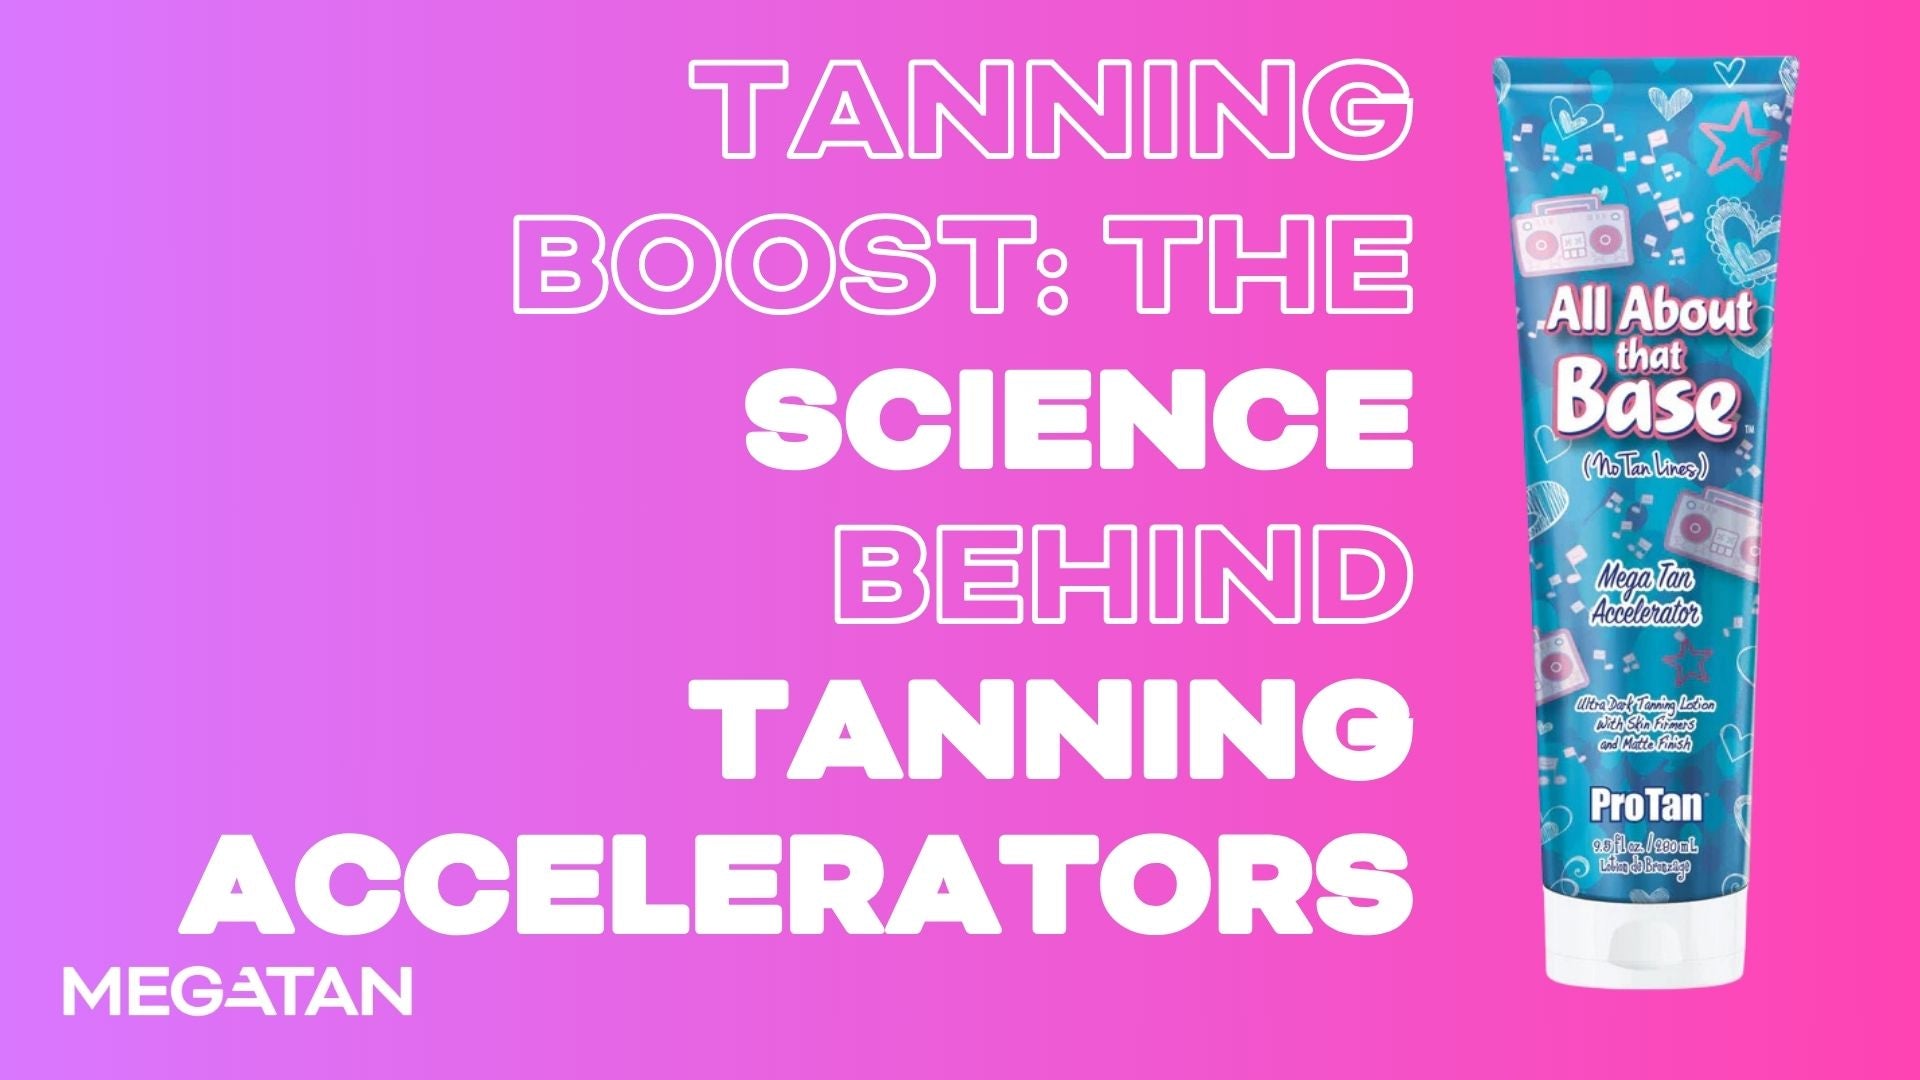 Tanning Boost: The Science Behind Tanning Accelerators